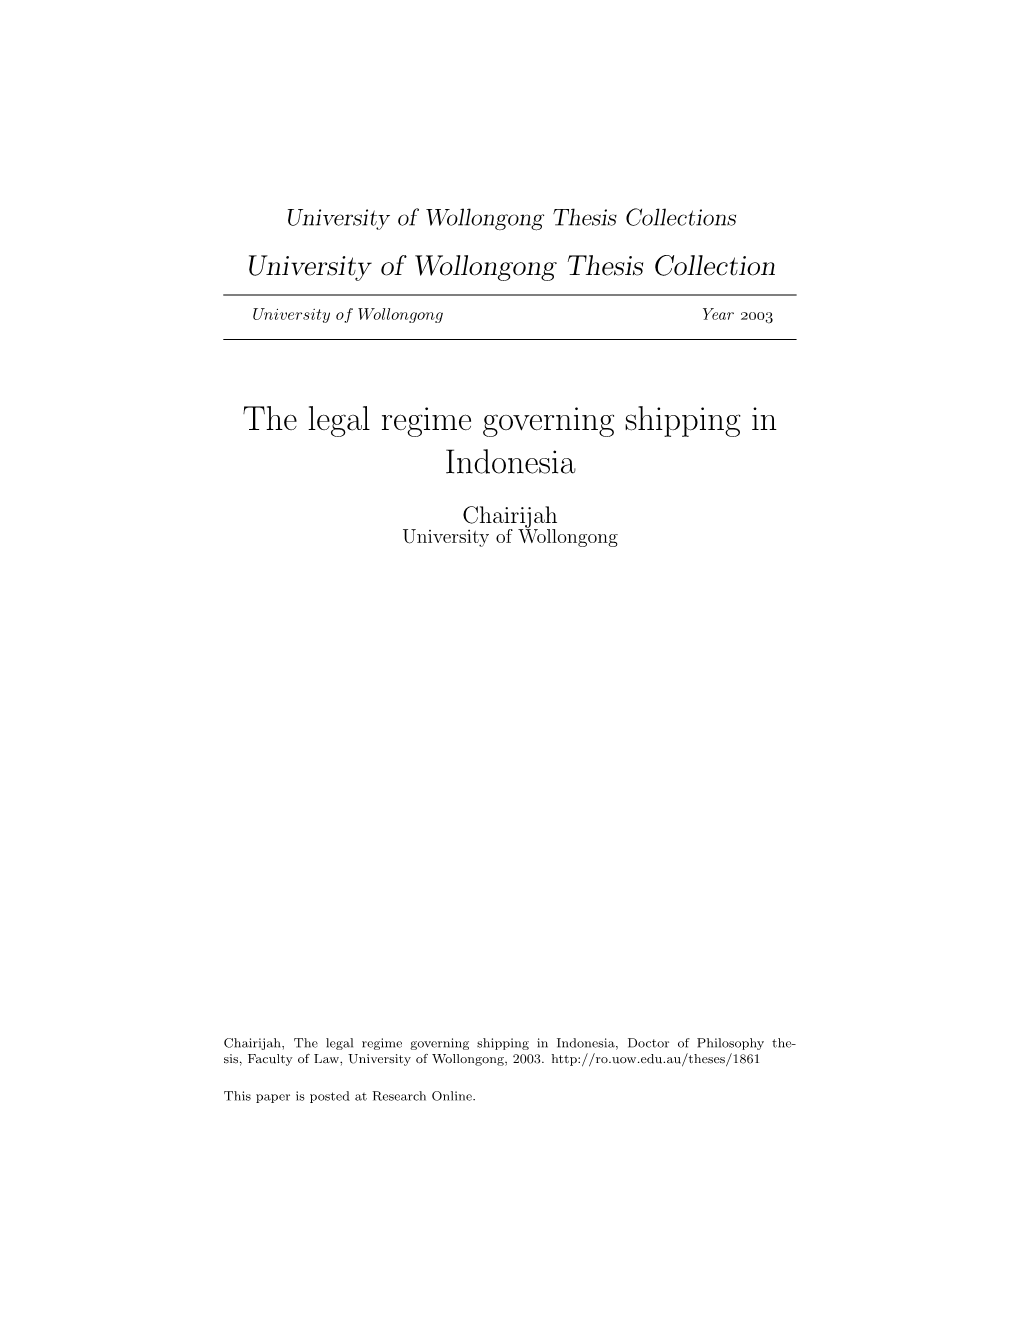 The Legal Regime Governing Shipping in Indonesia Chairijah University of Wollongong